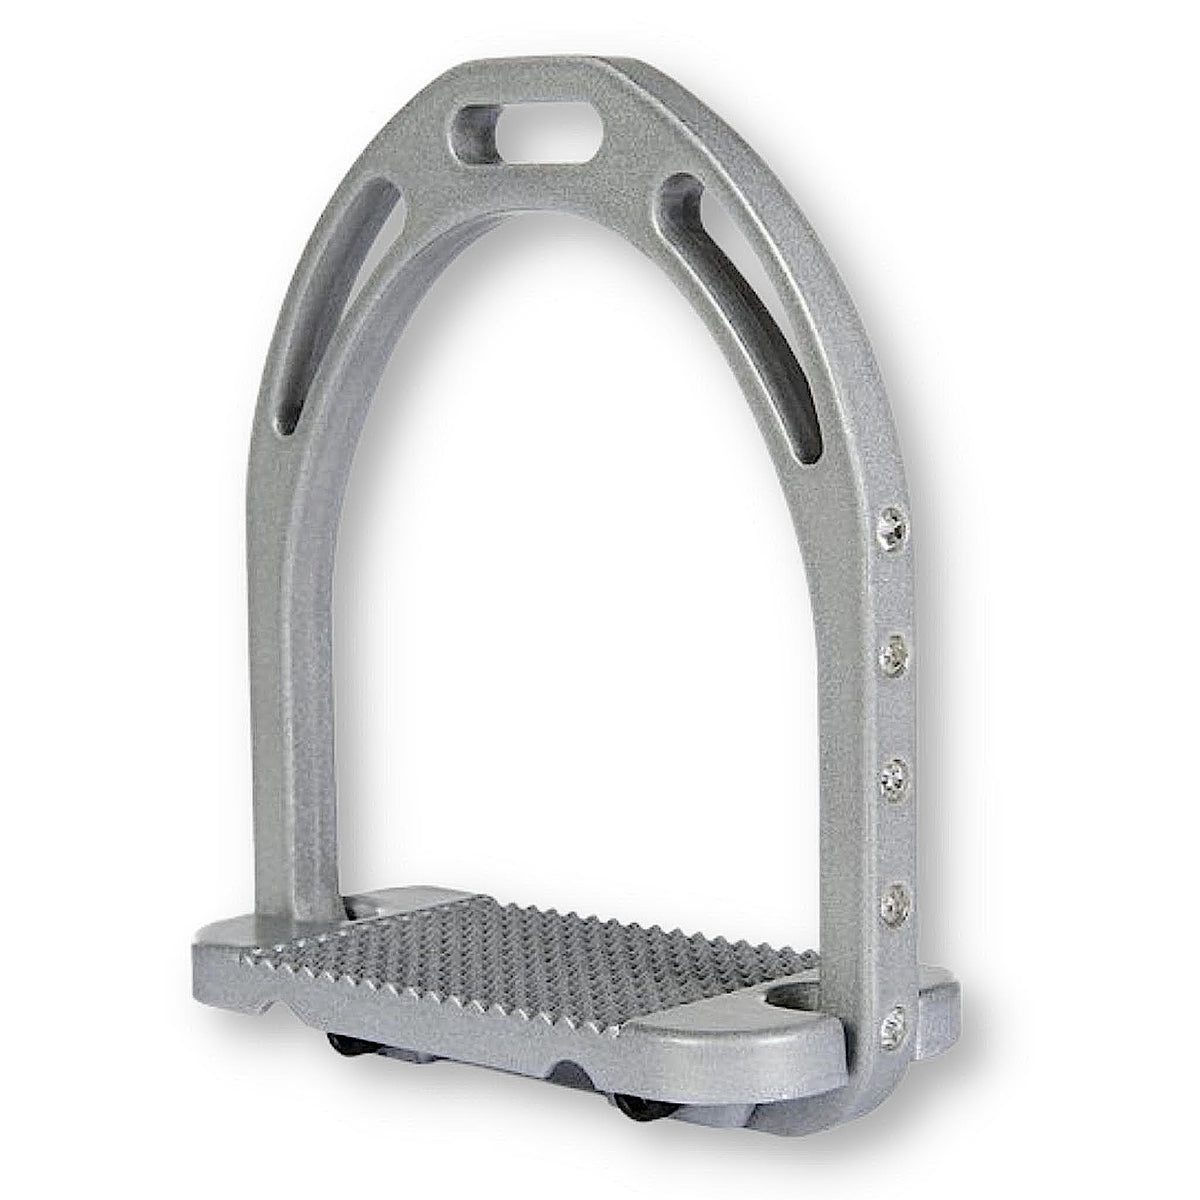 Silver metal stirrup with diamantes down side and grip tread.